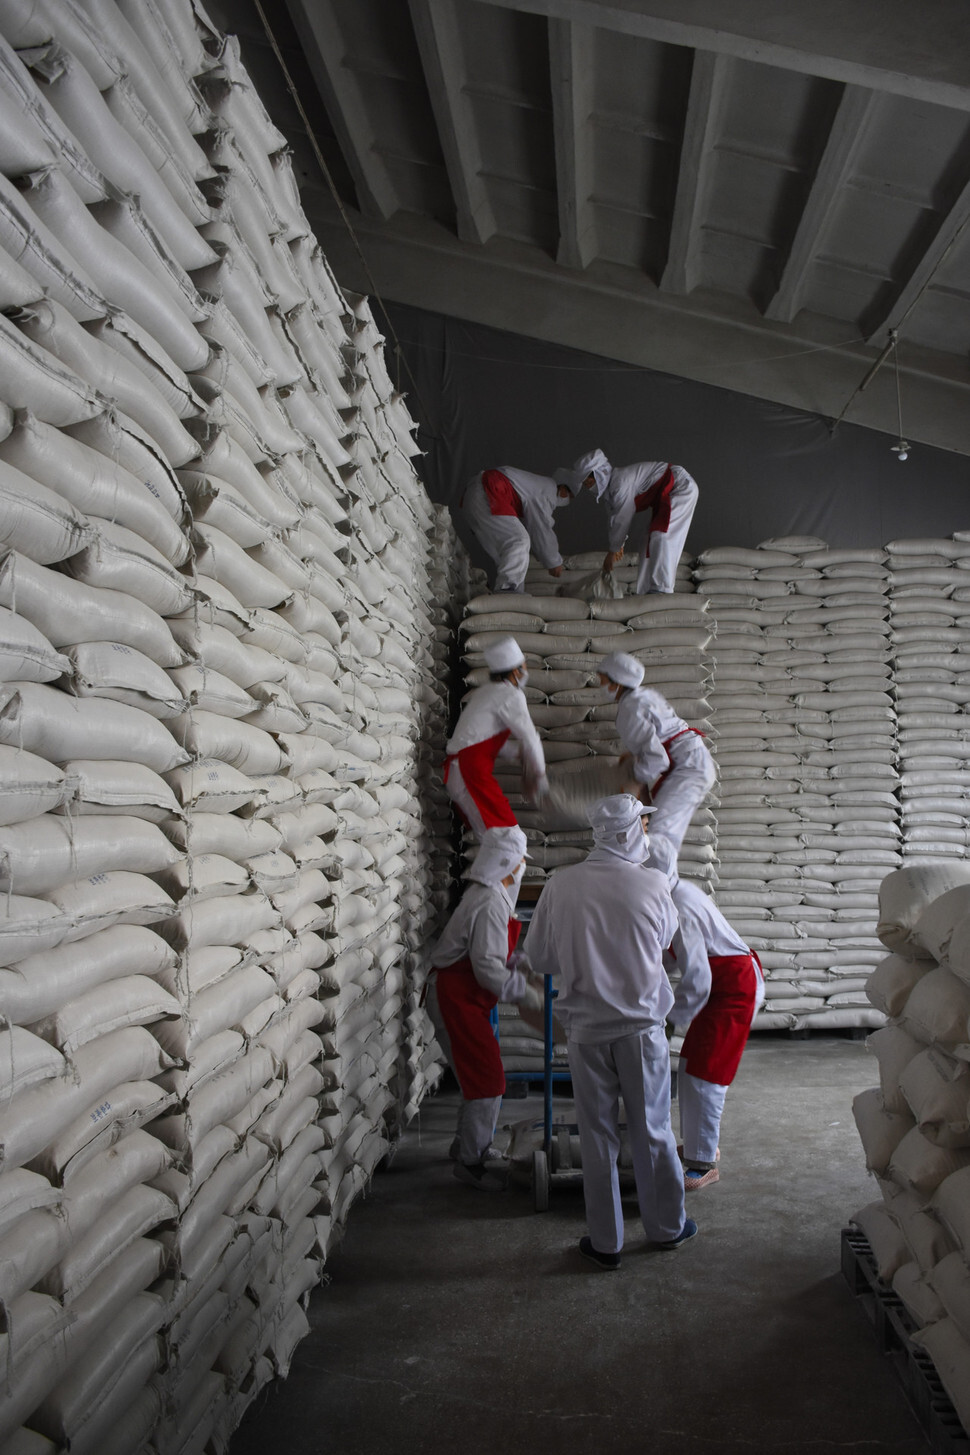 WFP Workers stockpile rice at a World Food Programme (WFP) storage facility in Pyongyang in 2016. (provided by the WFP)